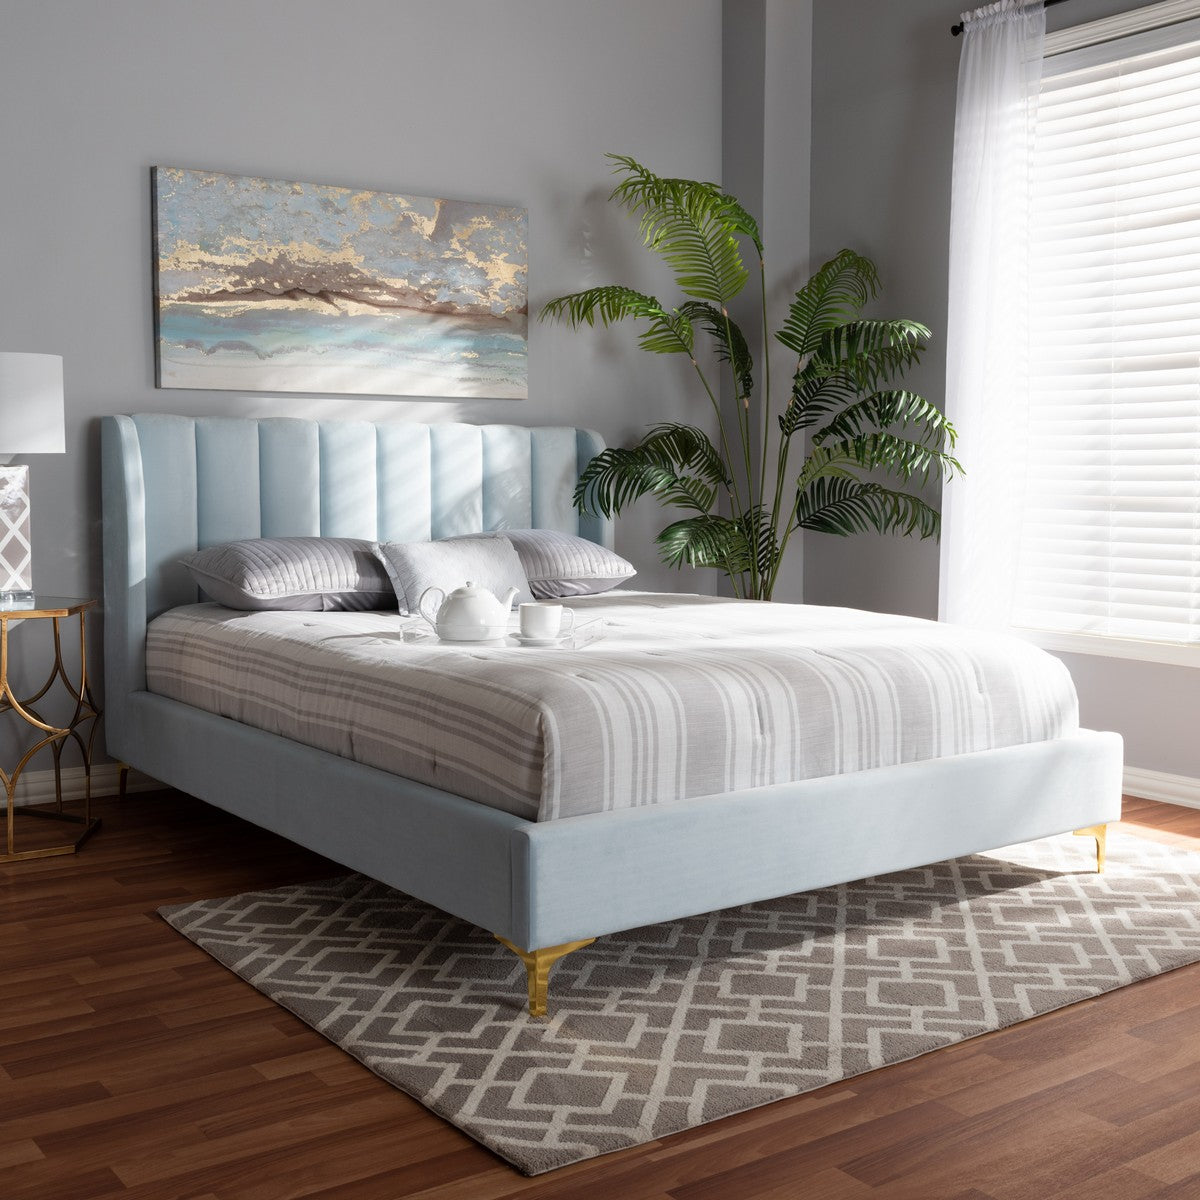 Baxton Studio Saverio Glam and Luxe Light Blue Velvet Fabric Upholstered Queen Size Platform Bed with Gold-Tone Legs